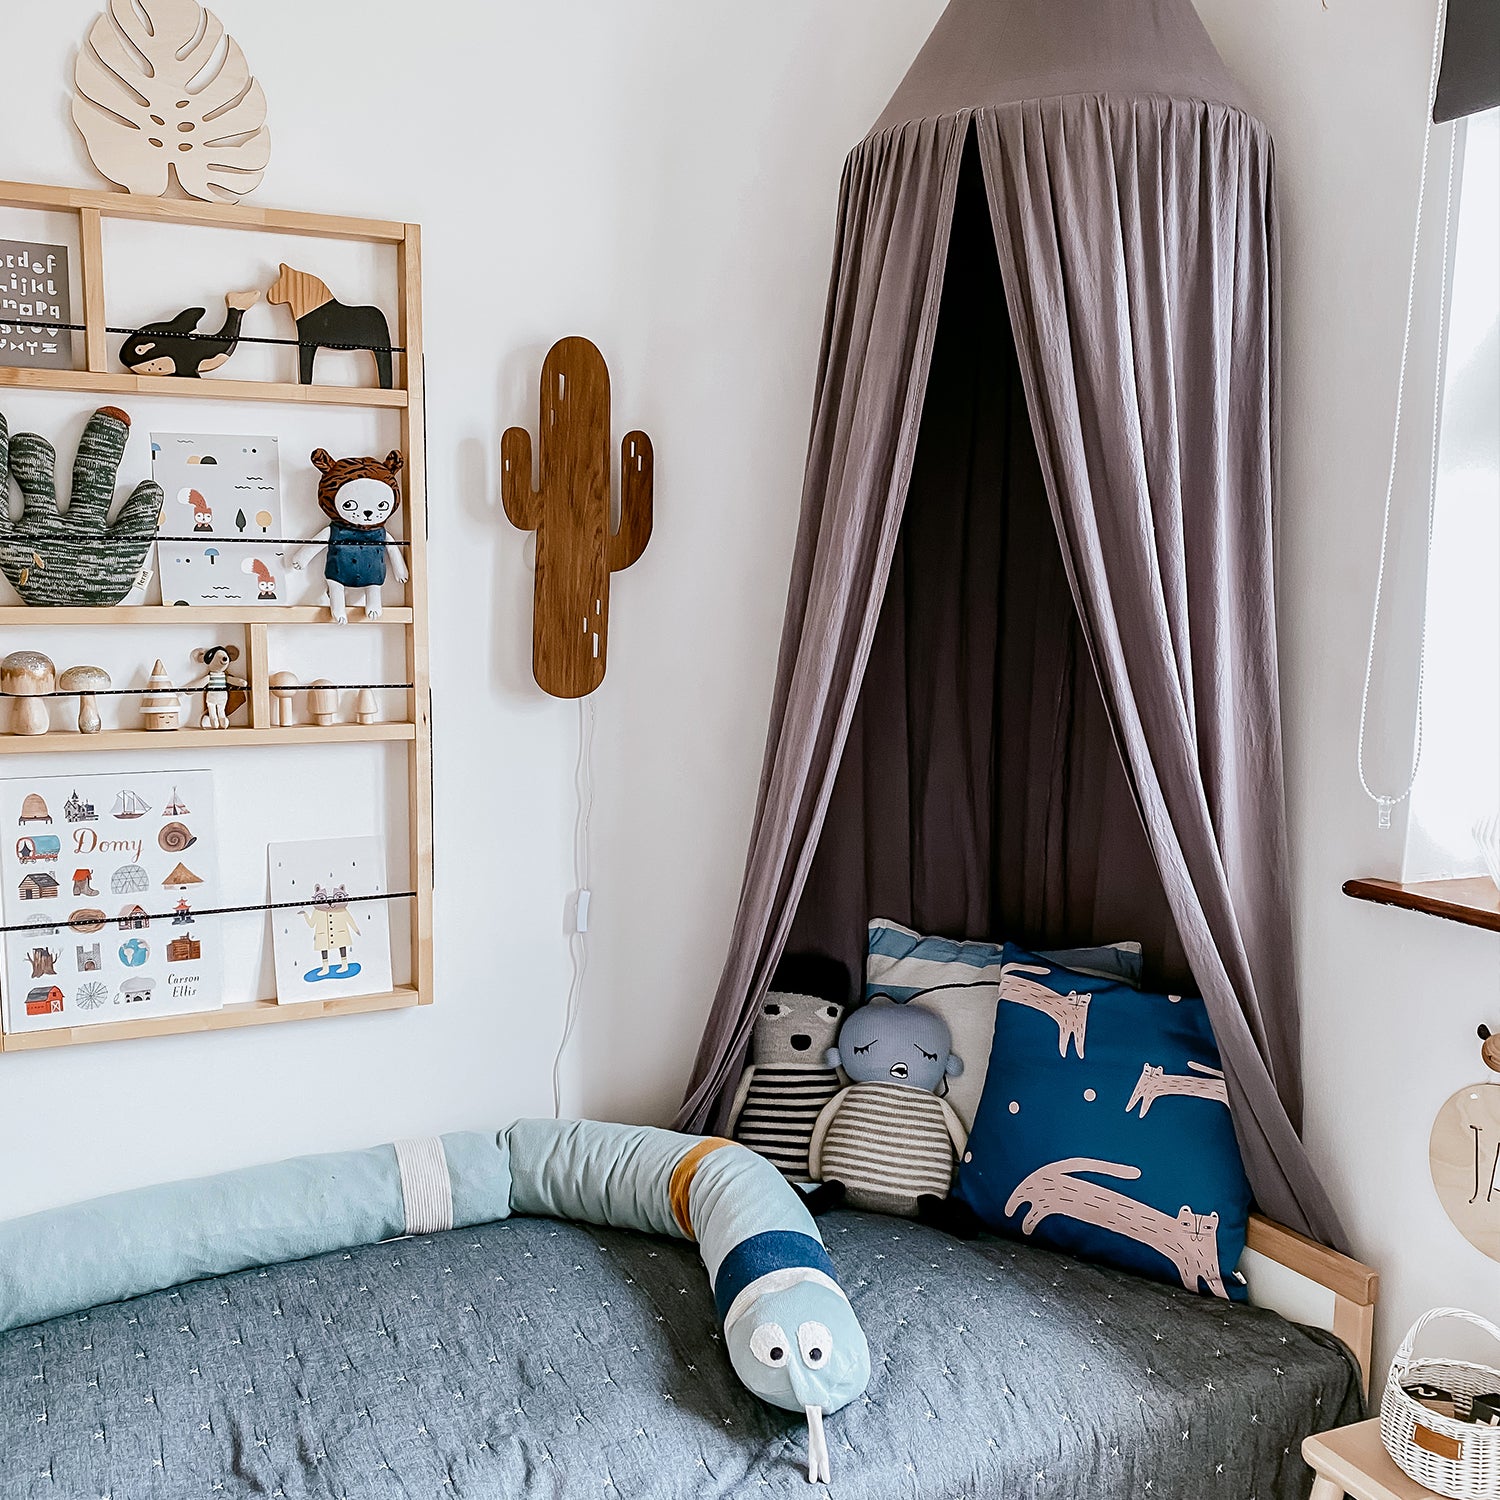 How to Decorate the Perfect Kids’ Room